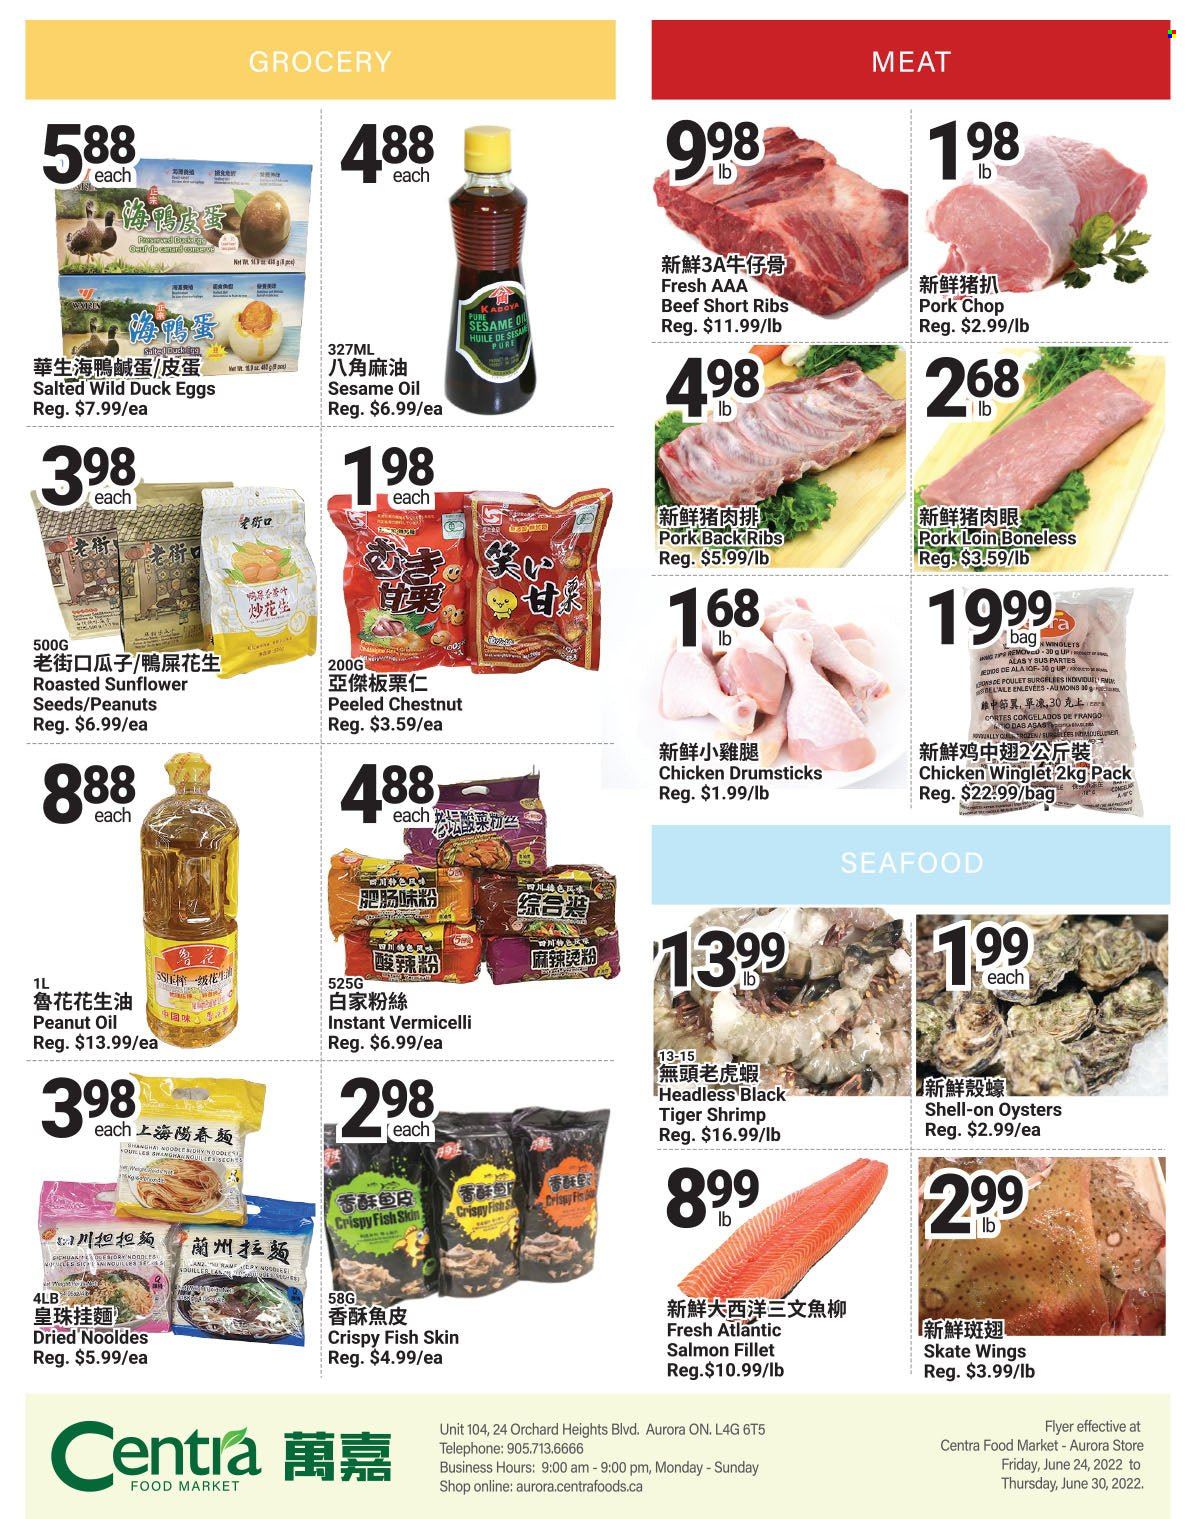 thumbnail - Centra Food Market Flyer - Sales products - salmon, salmon fillet, oysters, seafood, fish, shrimps, noodles, eggs, sesame oil, peanut oil, oil, peanuts, chicken drumsticks, chicken, beef ribs, pork chops, pork loin, pork meat, pork ribs, pork back ribs, bag. Page 4.